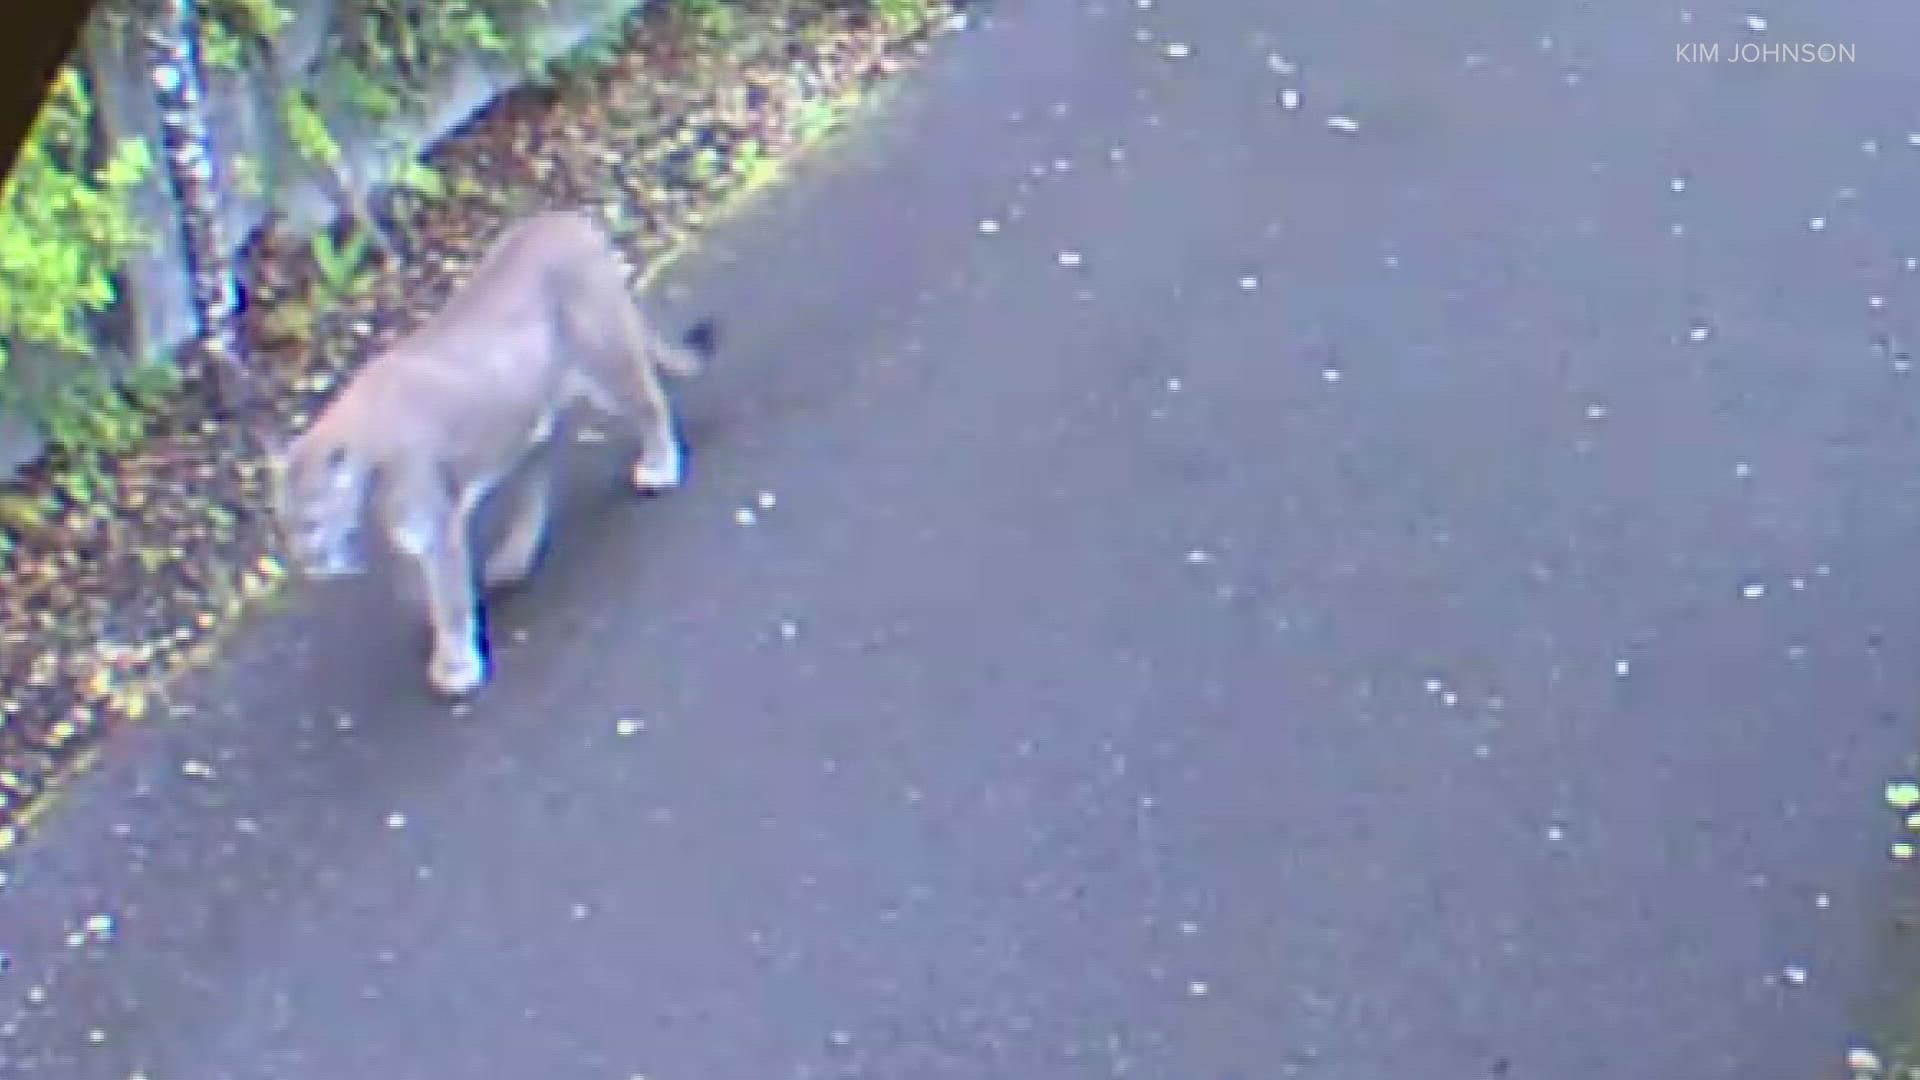 Olympia cougar sighting no cause for alarm, wildlife officials say